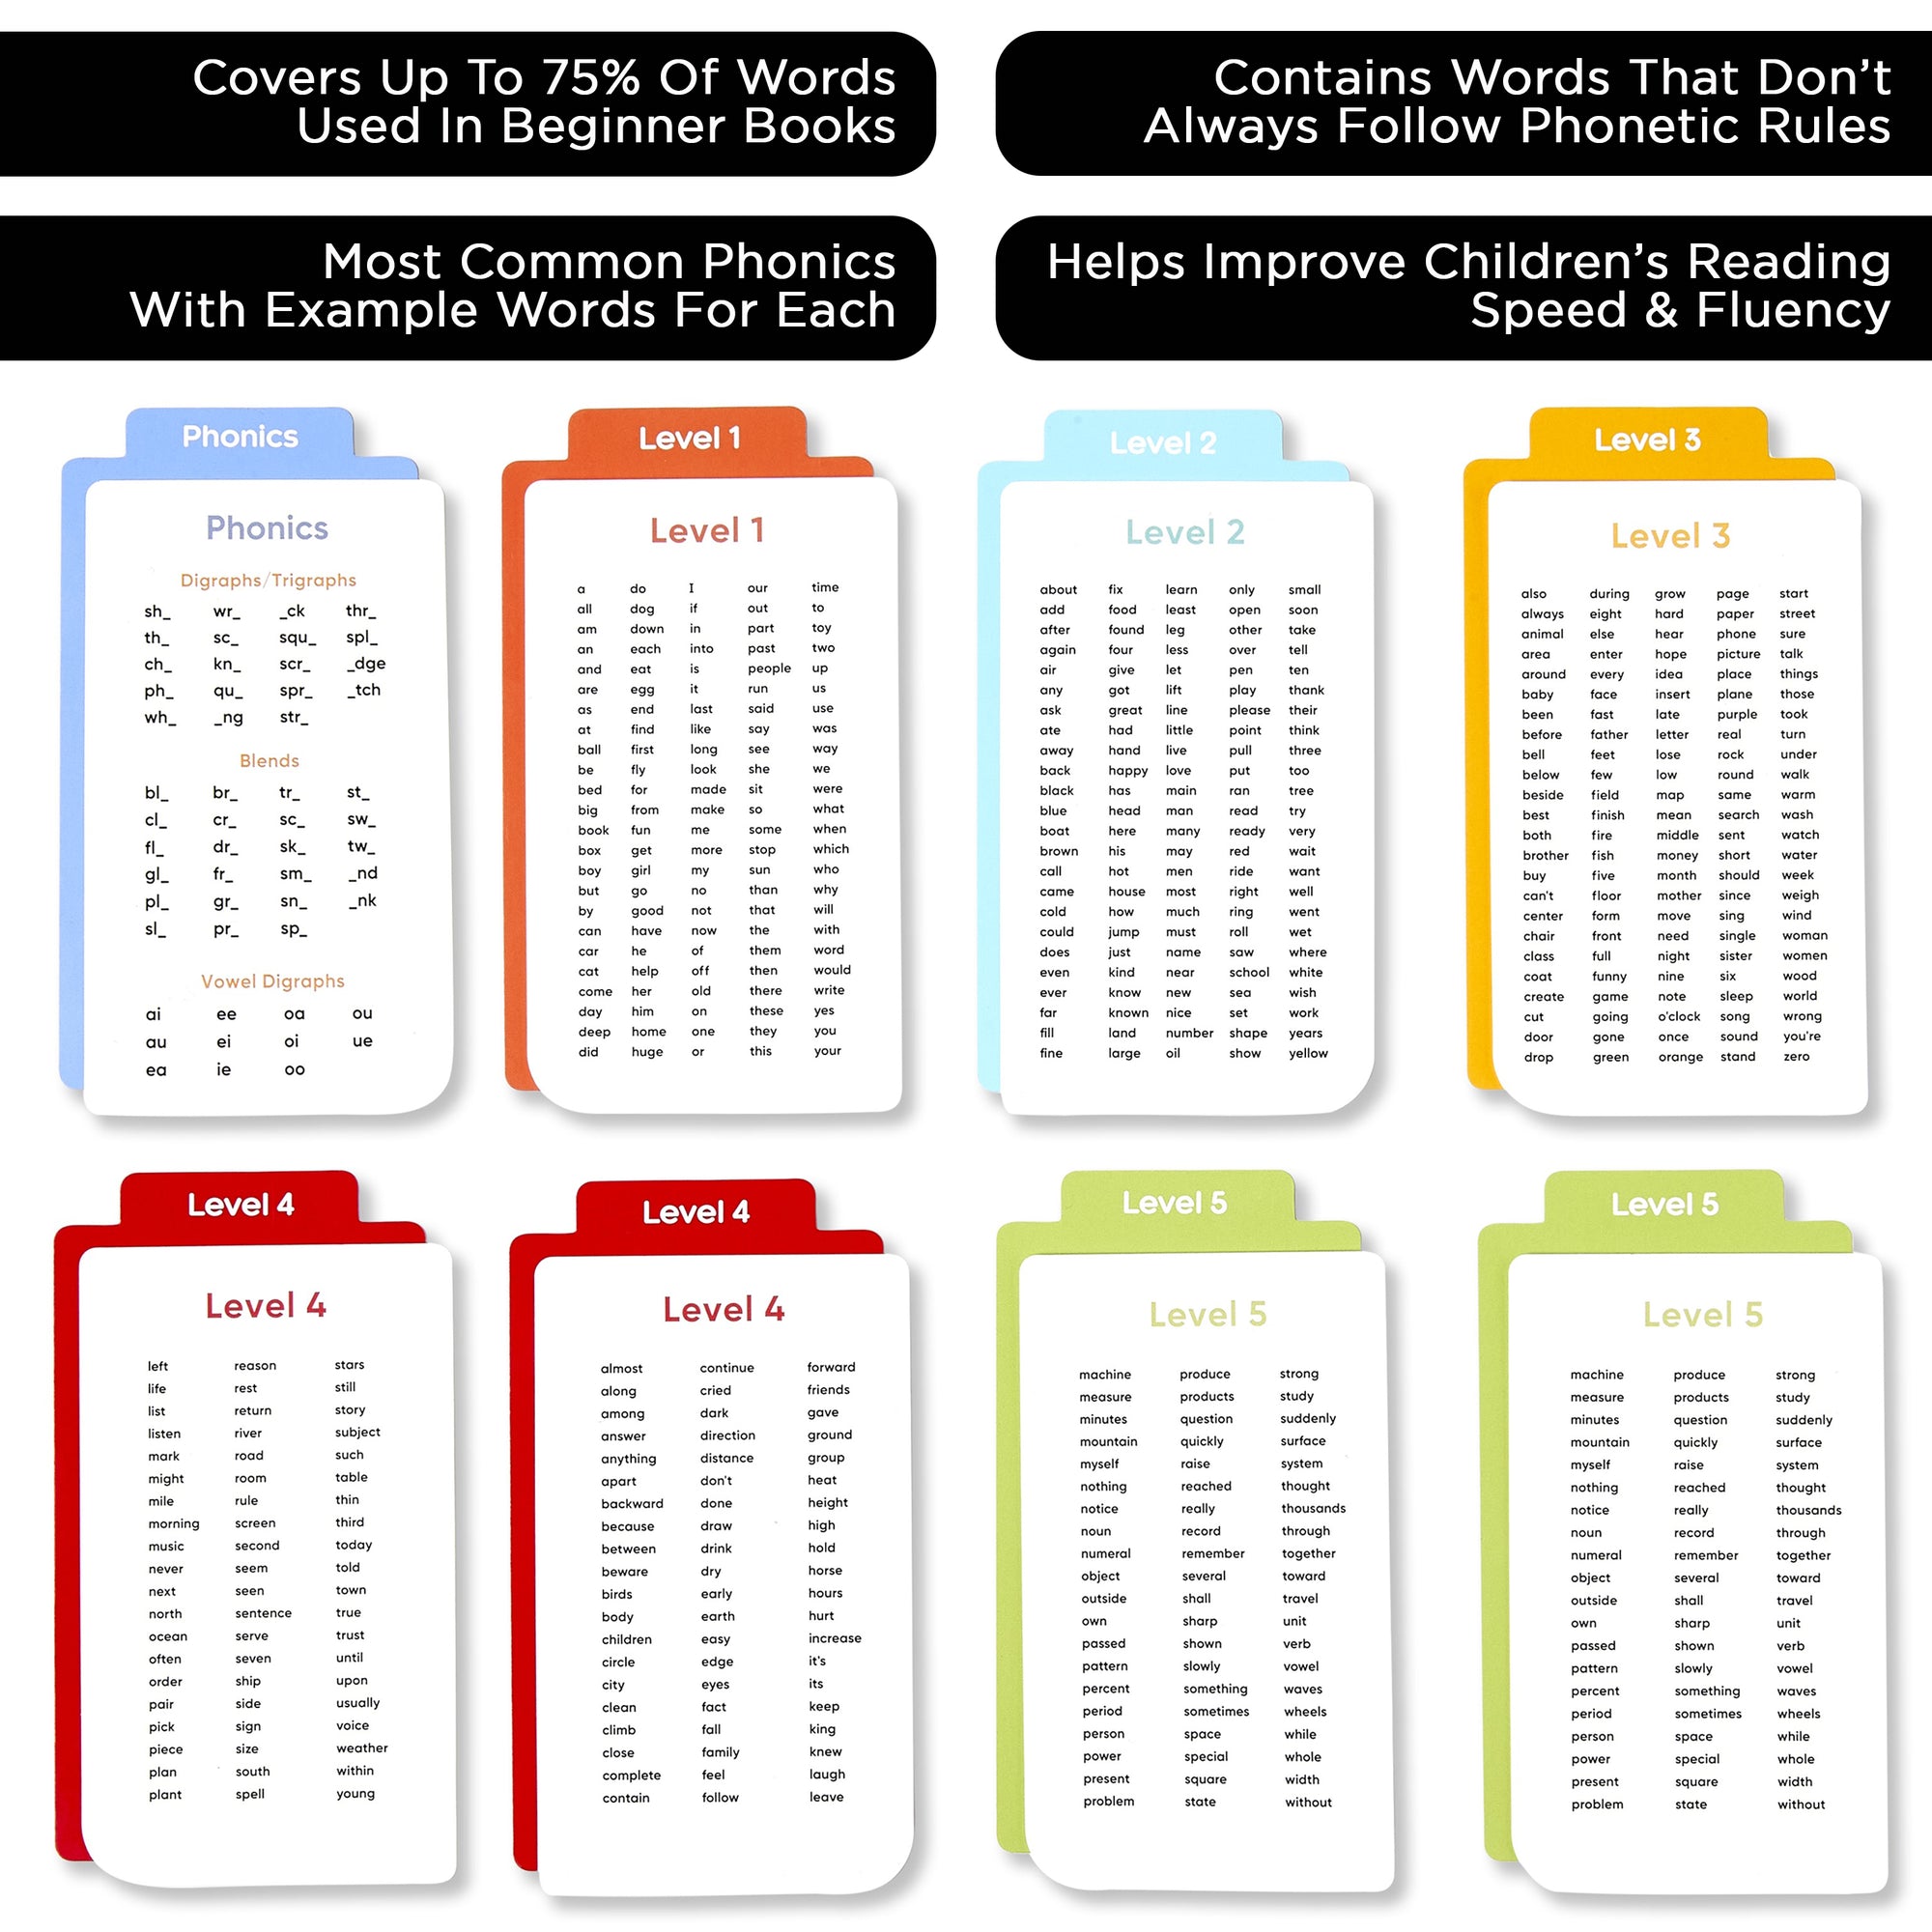 Oxford Sight Word Flash Cards by Perthteacher